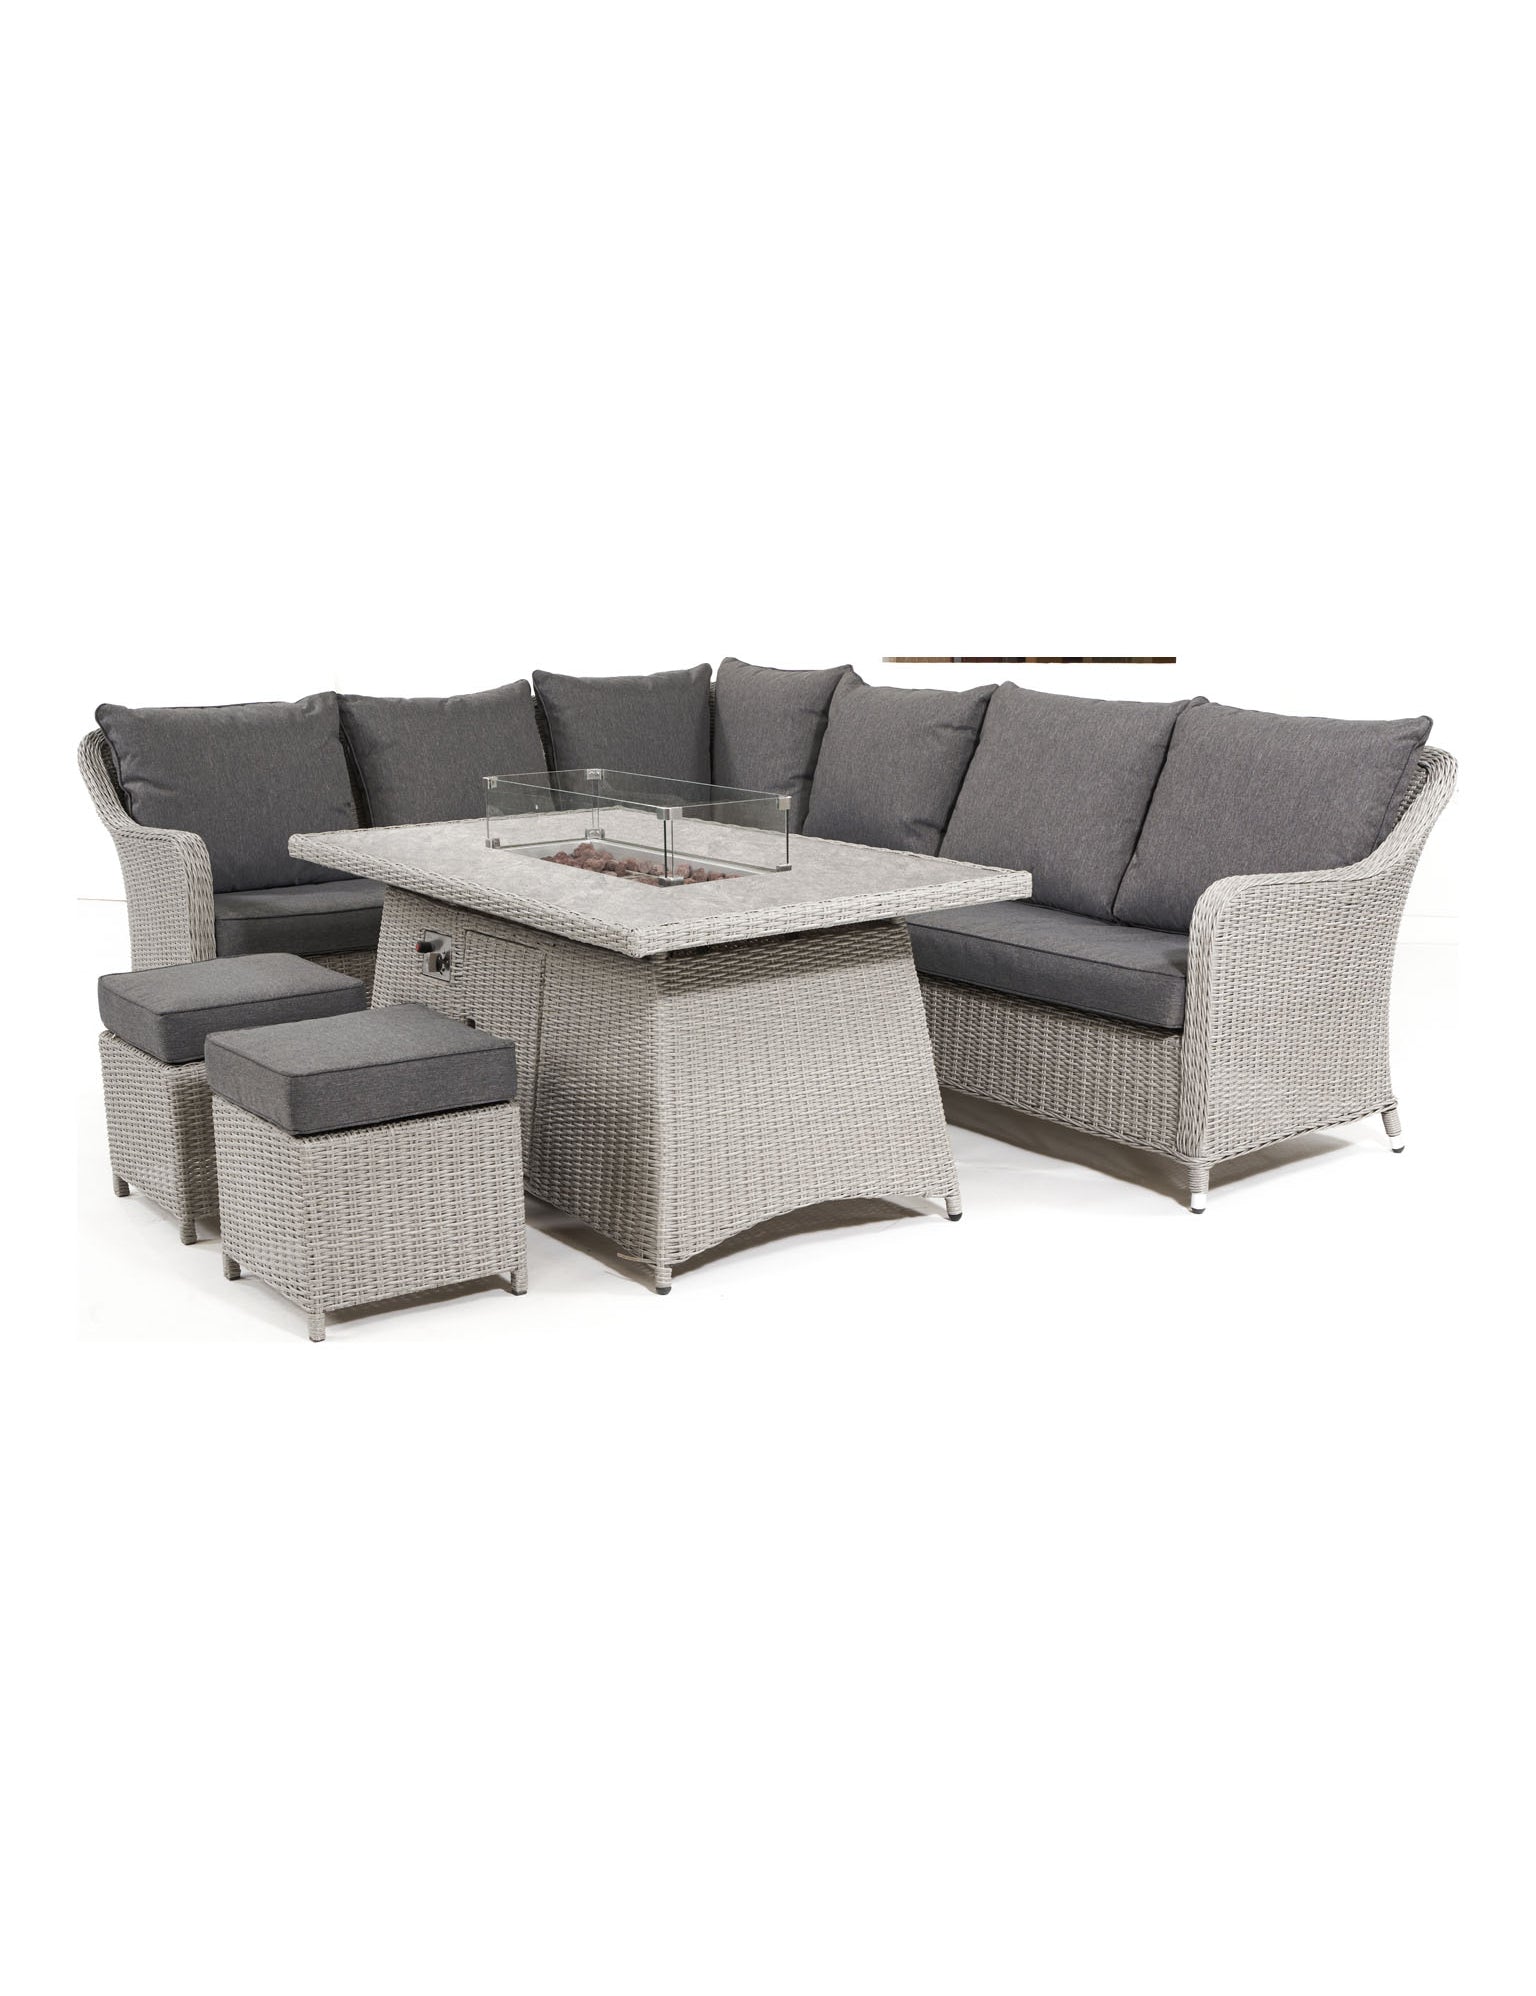 Relaxed Dining outdoor furniture with adjustable table is made from a UV protected, weatherproof, synthetic rattan. 